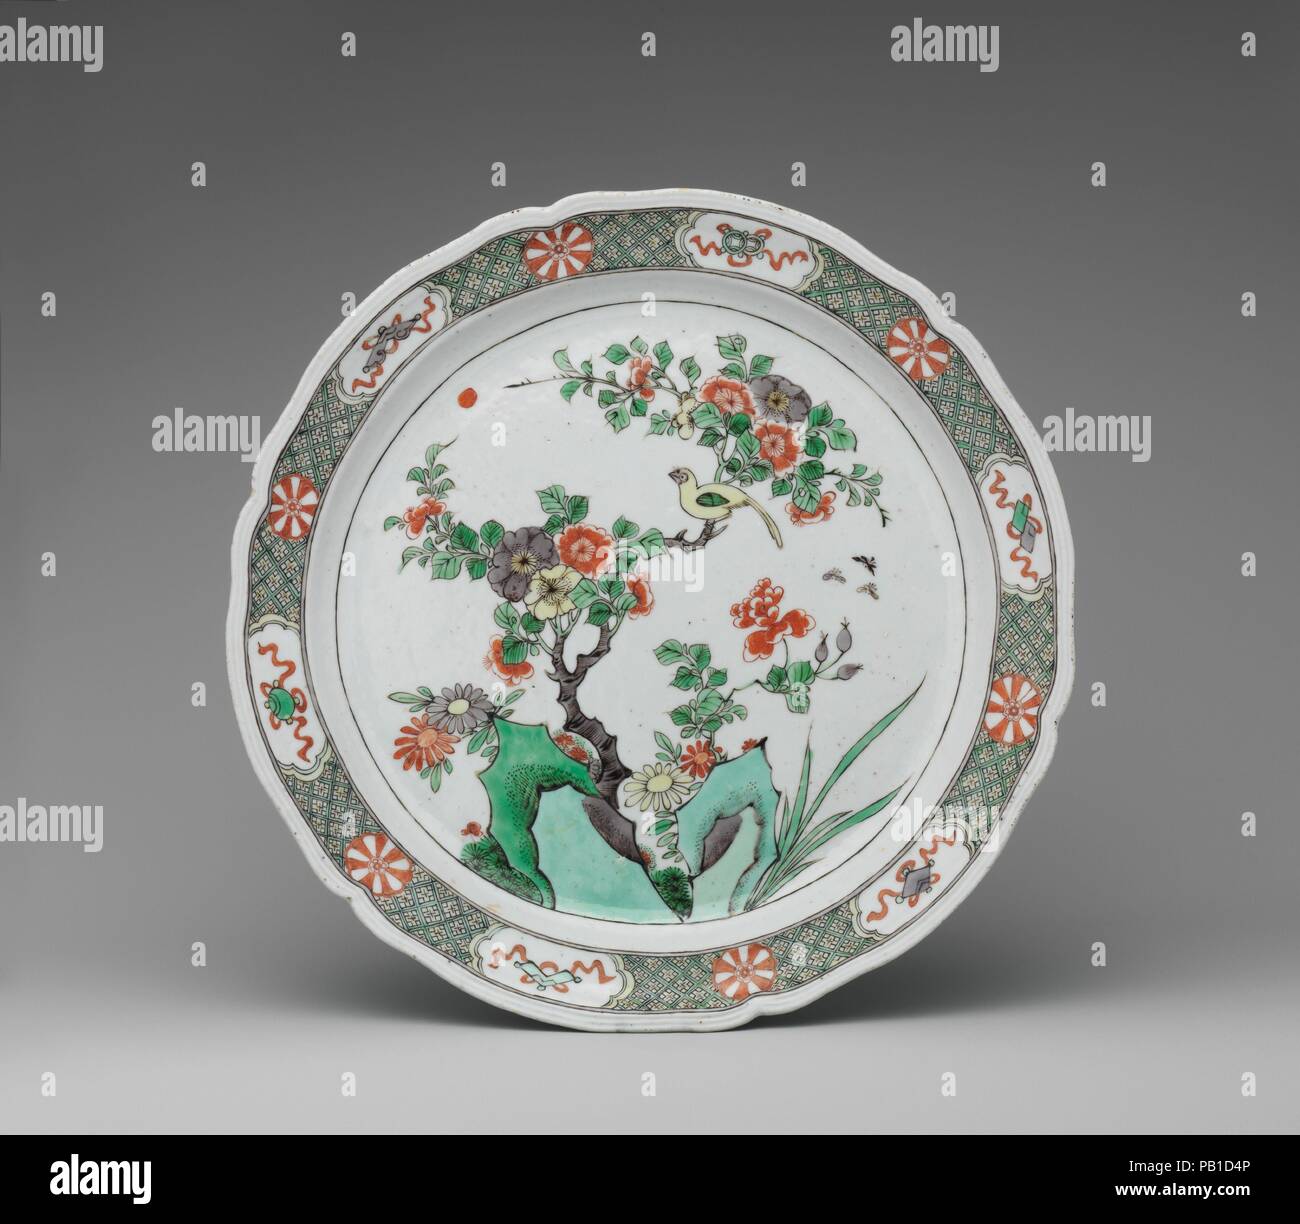 Dish with rocks, flowers, and birds. Culture: Chinese, for European,  probably French, market. Dimensions: Diameter: 12 3/8 in. (31.4 cm). Date:  1725-30. In addition to the standard motif of rocks, flowers, and